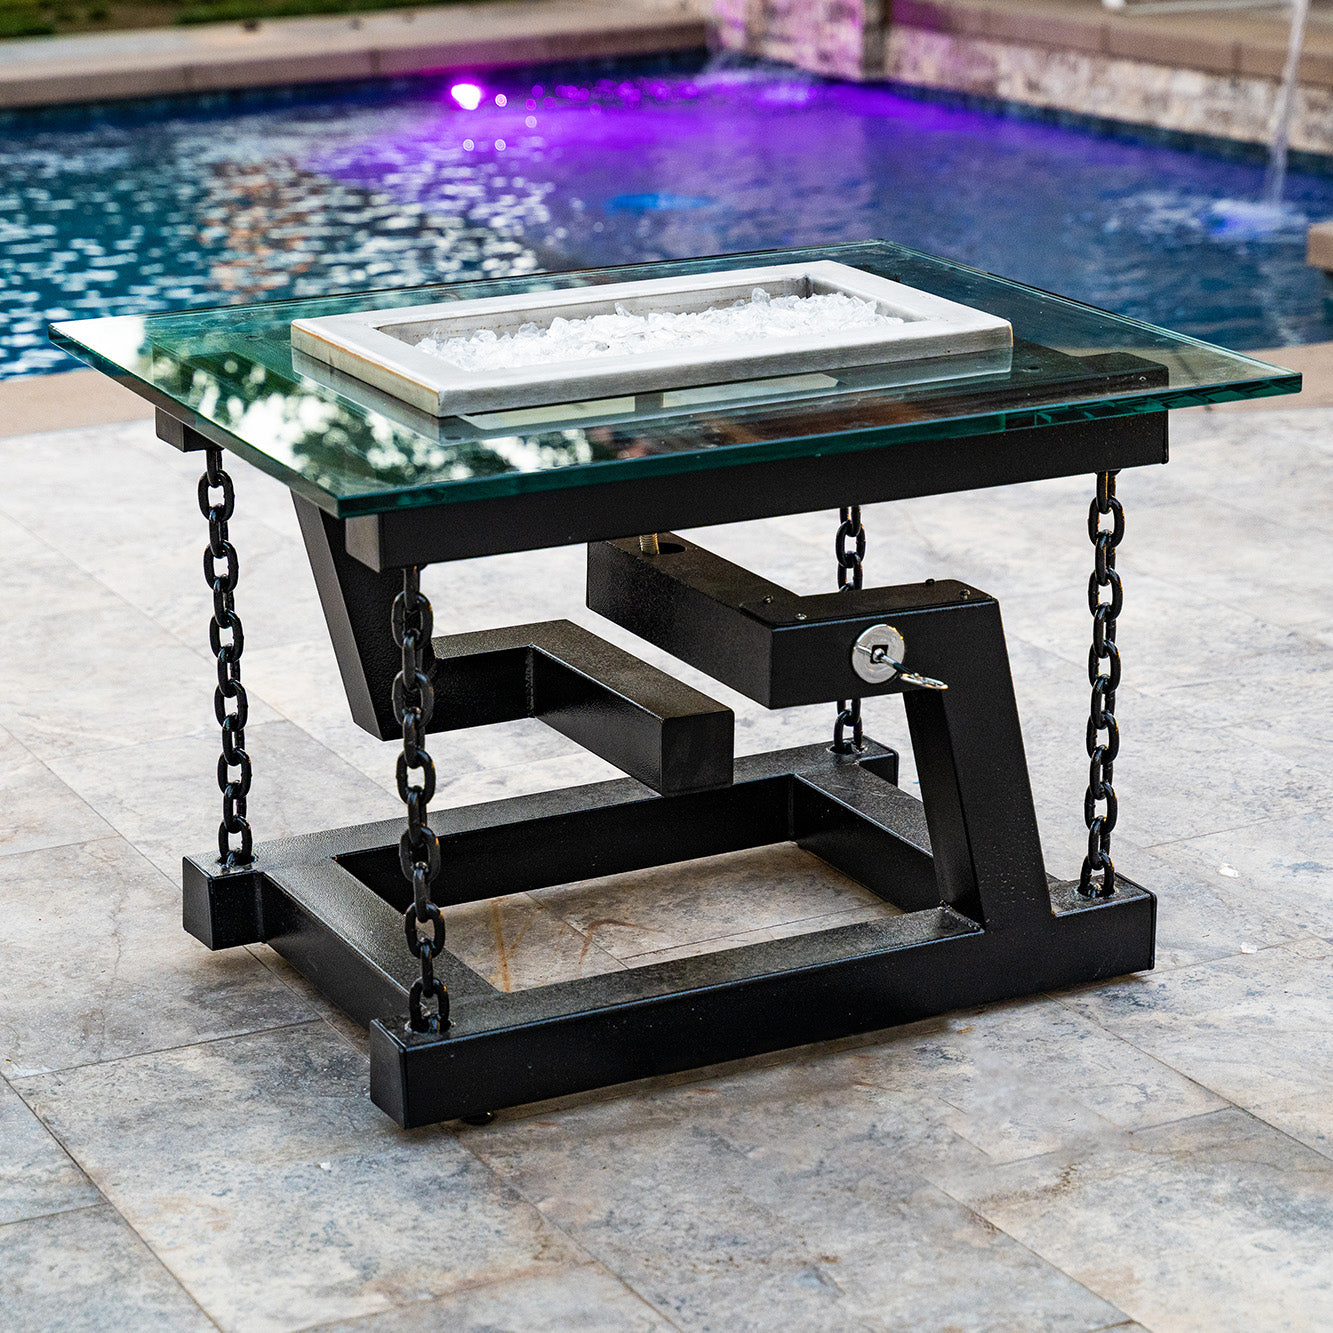 The Outdoor Plus Newton 52" Java Powder Coated Metal Natural Gas Fire Pit with Chain Support & Match Lit Ignition